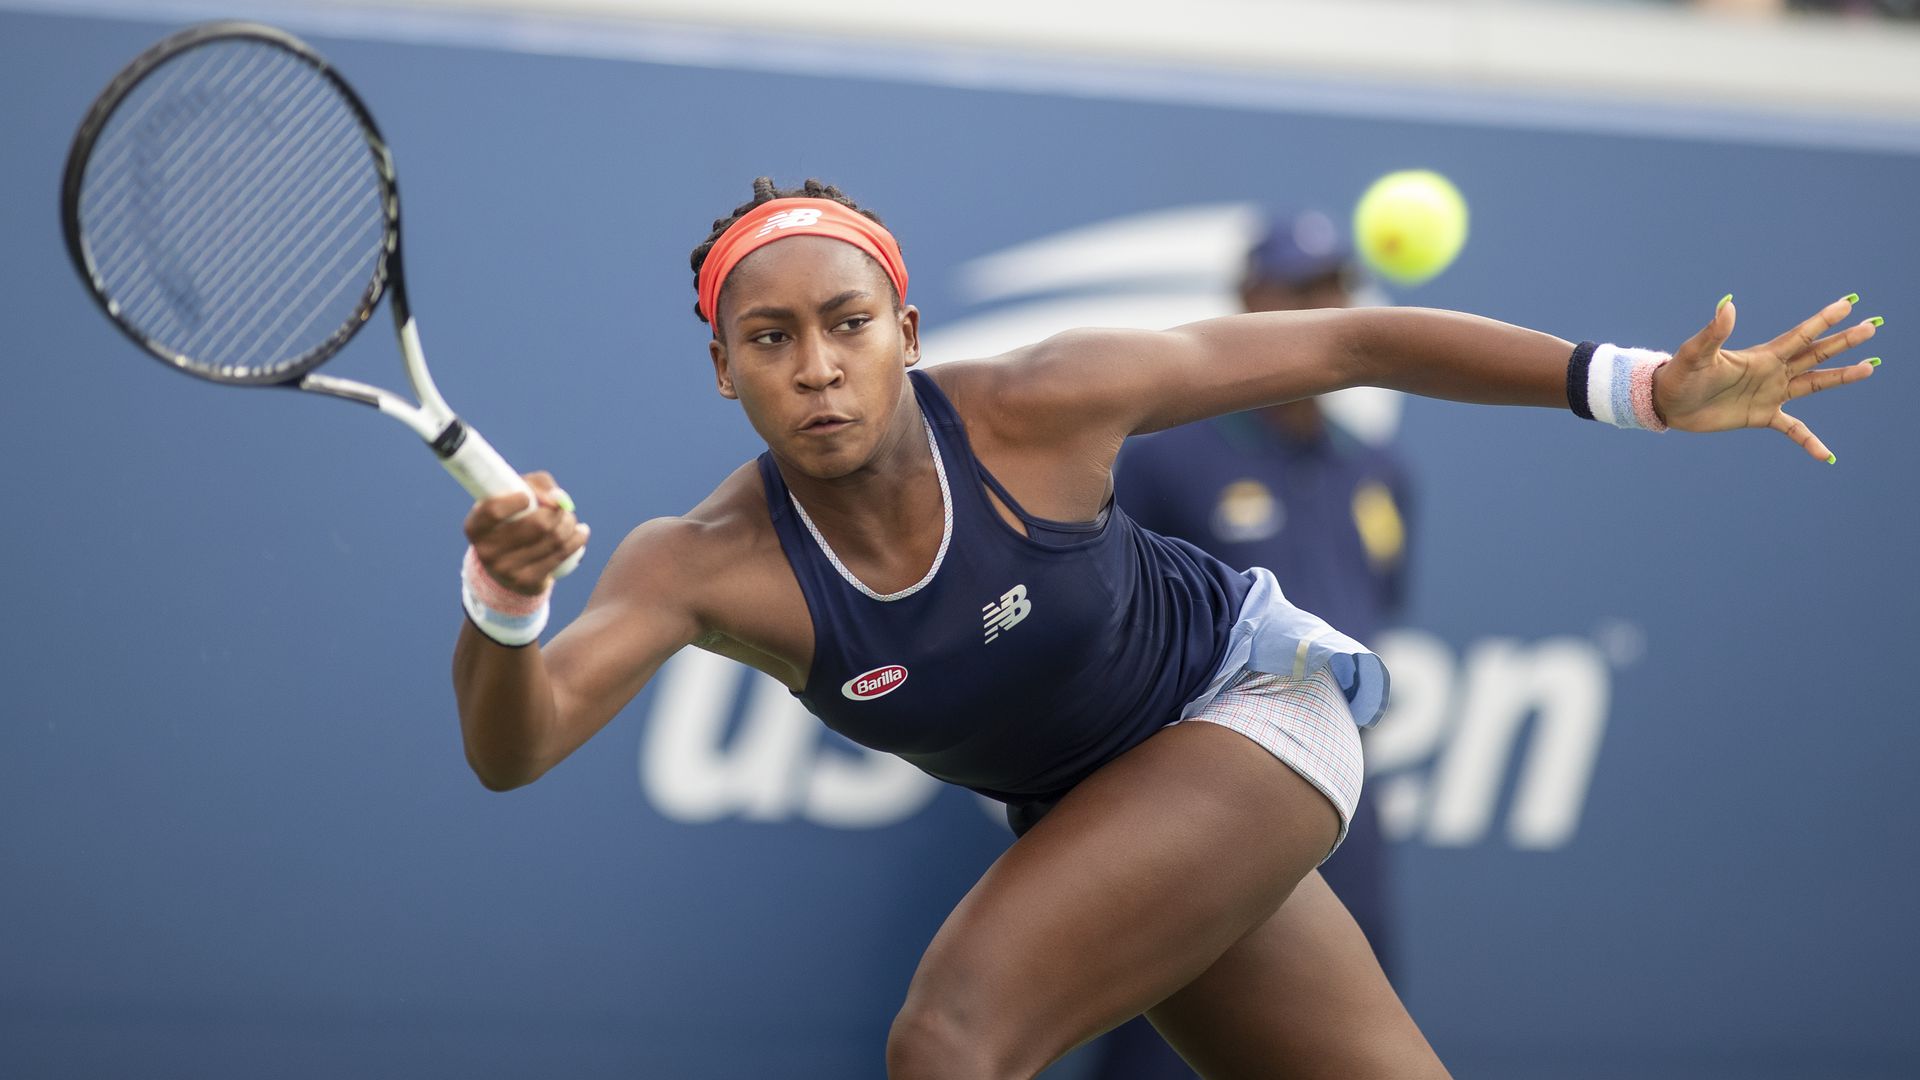 ‘I was just lost’: Coco Gauff says her rise to fame caused depression #DefenderRewind